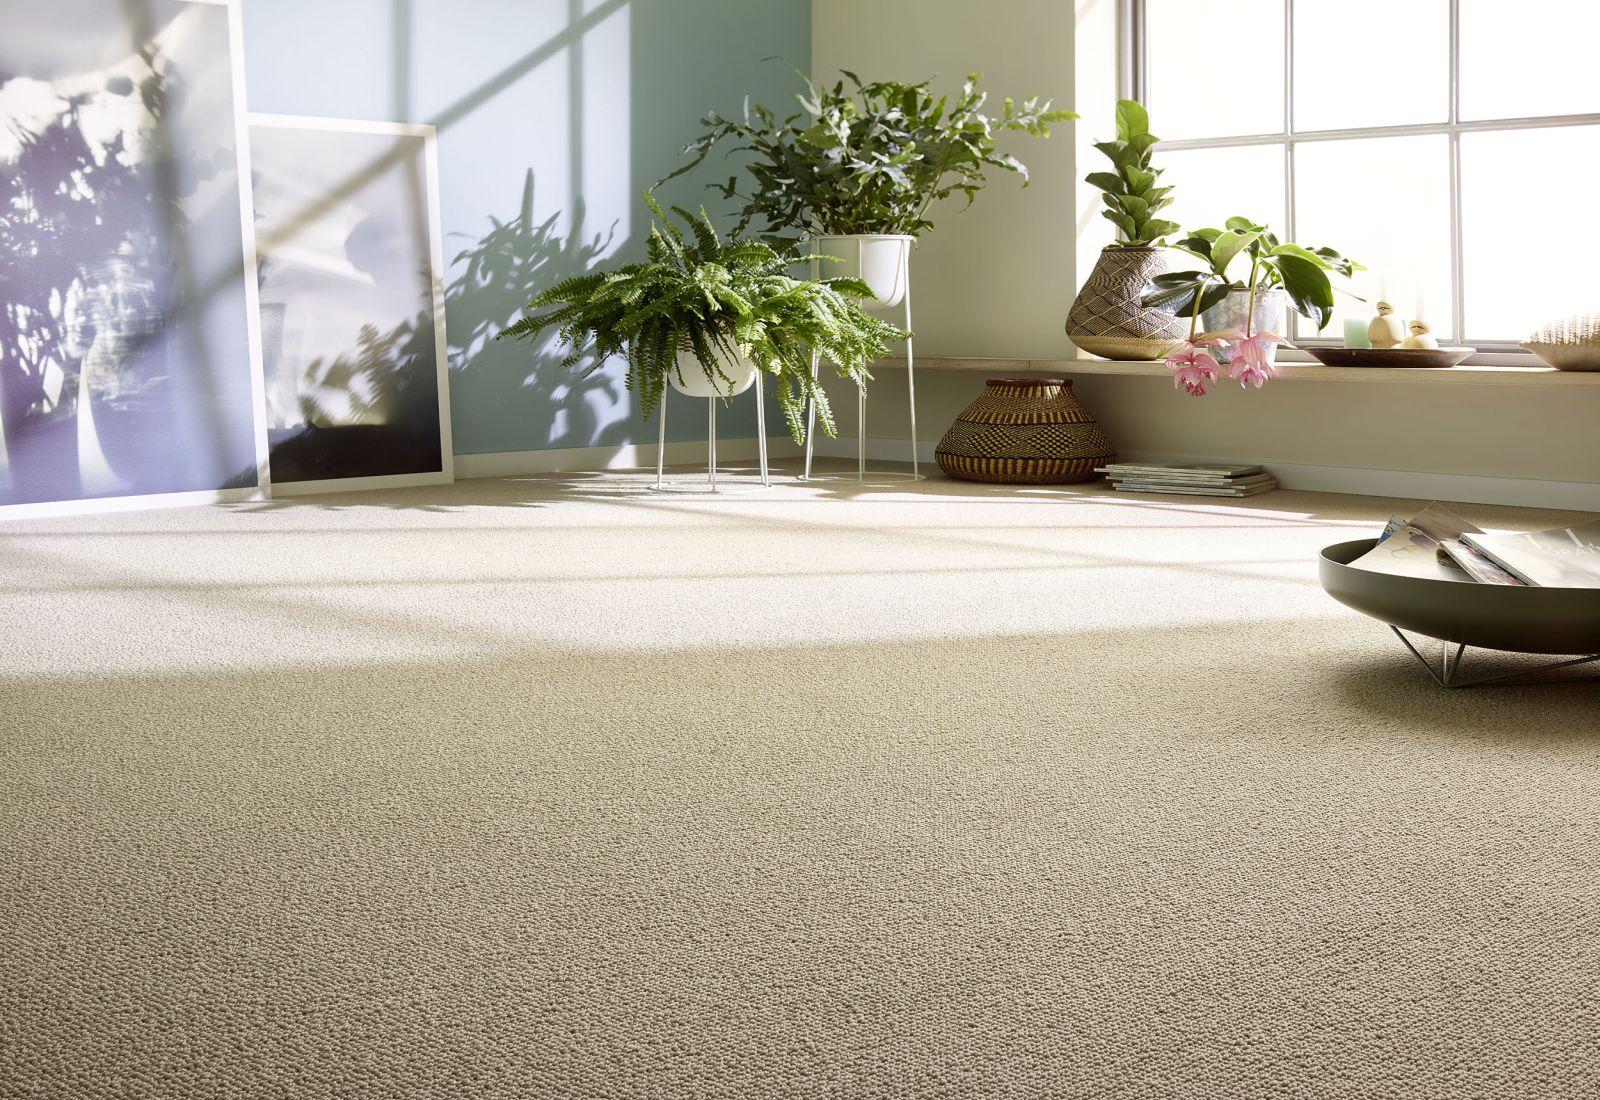 Raise Your Home Aesthetics with Vinyl Floor Covering Rugs